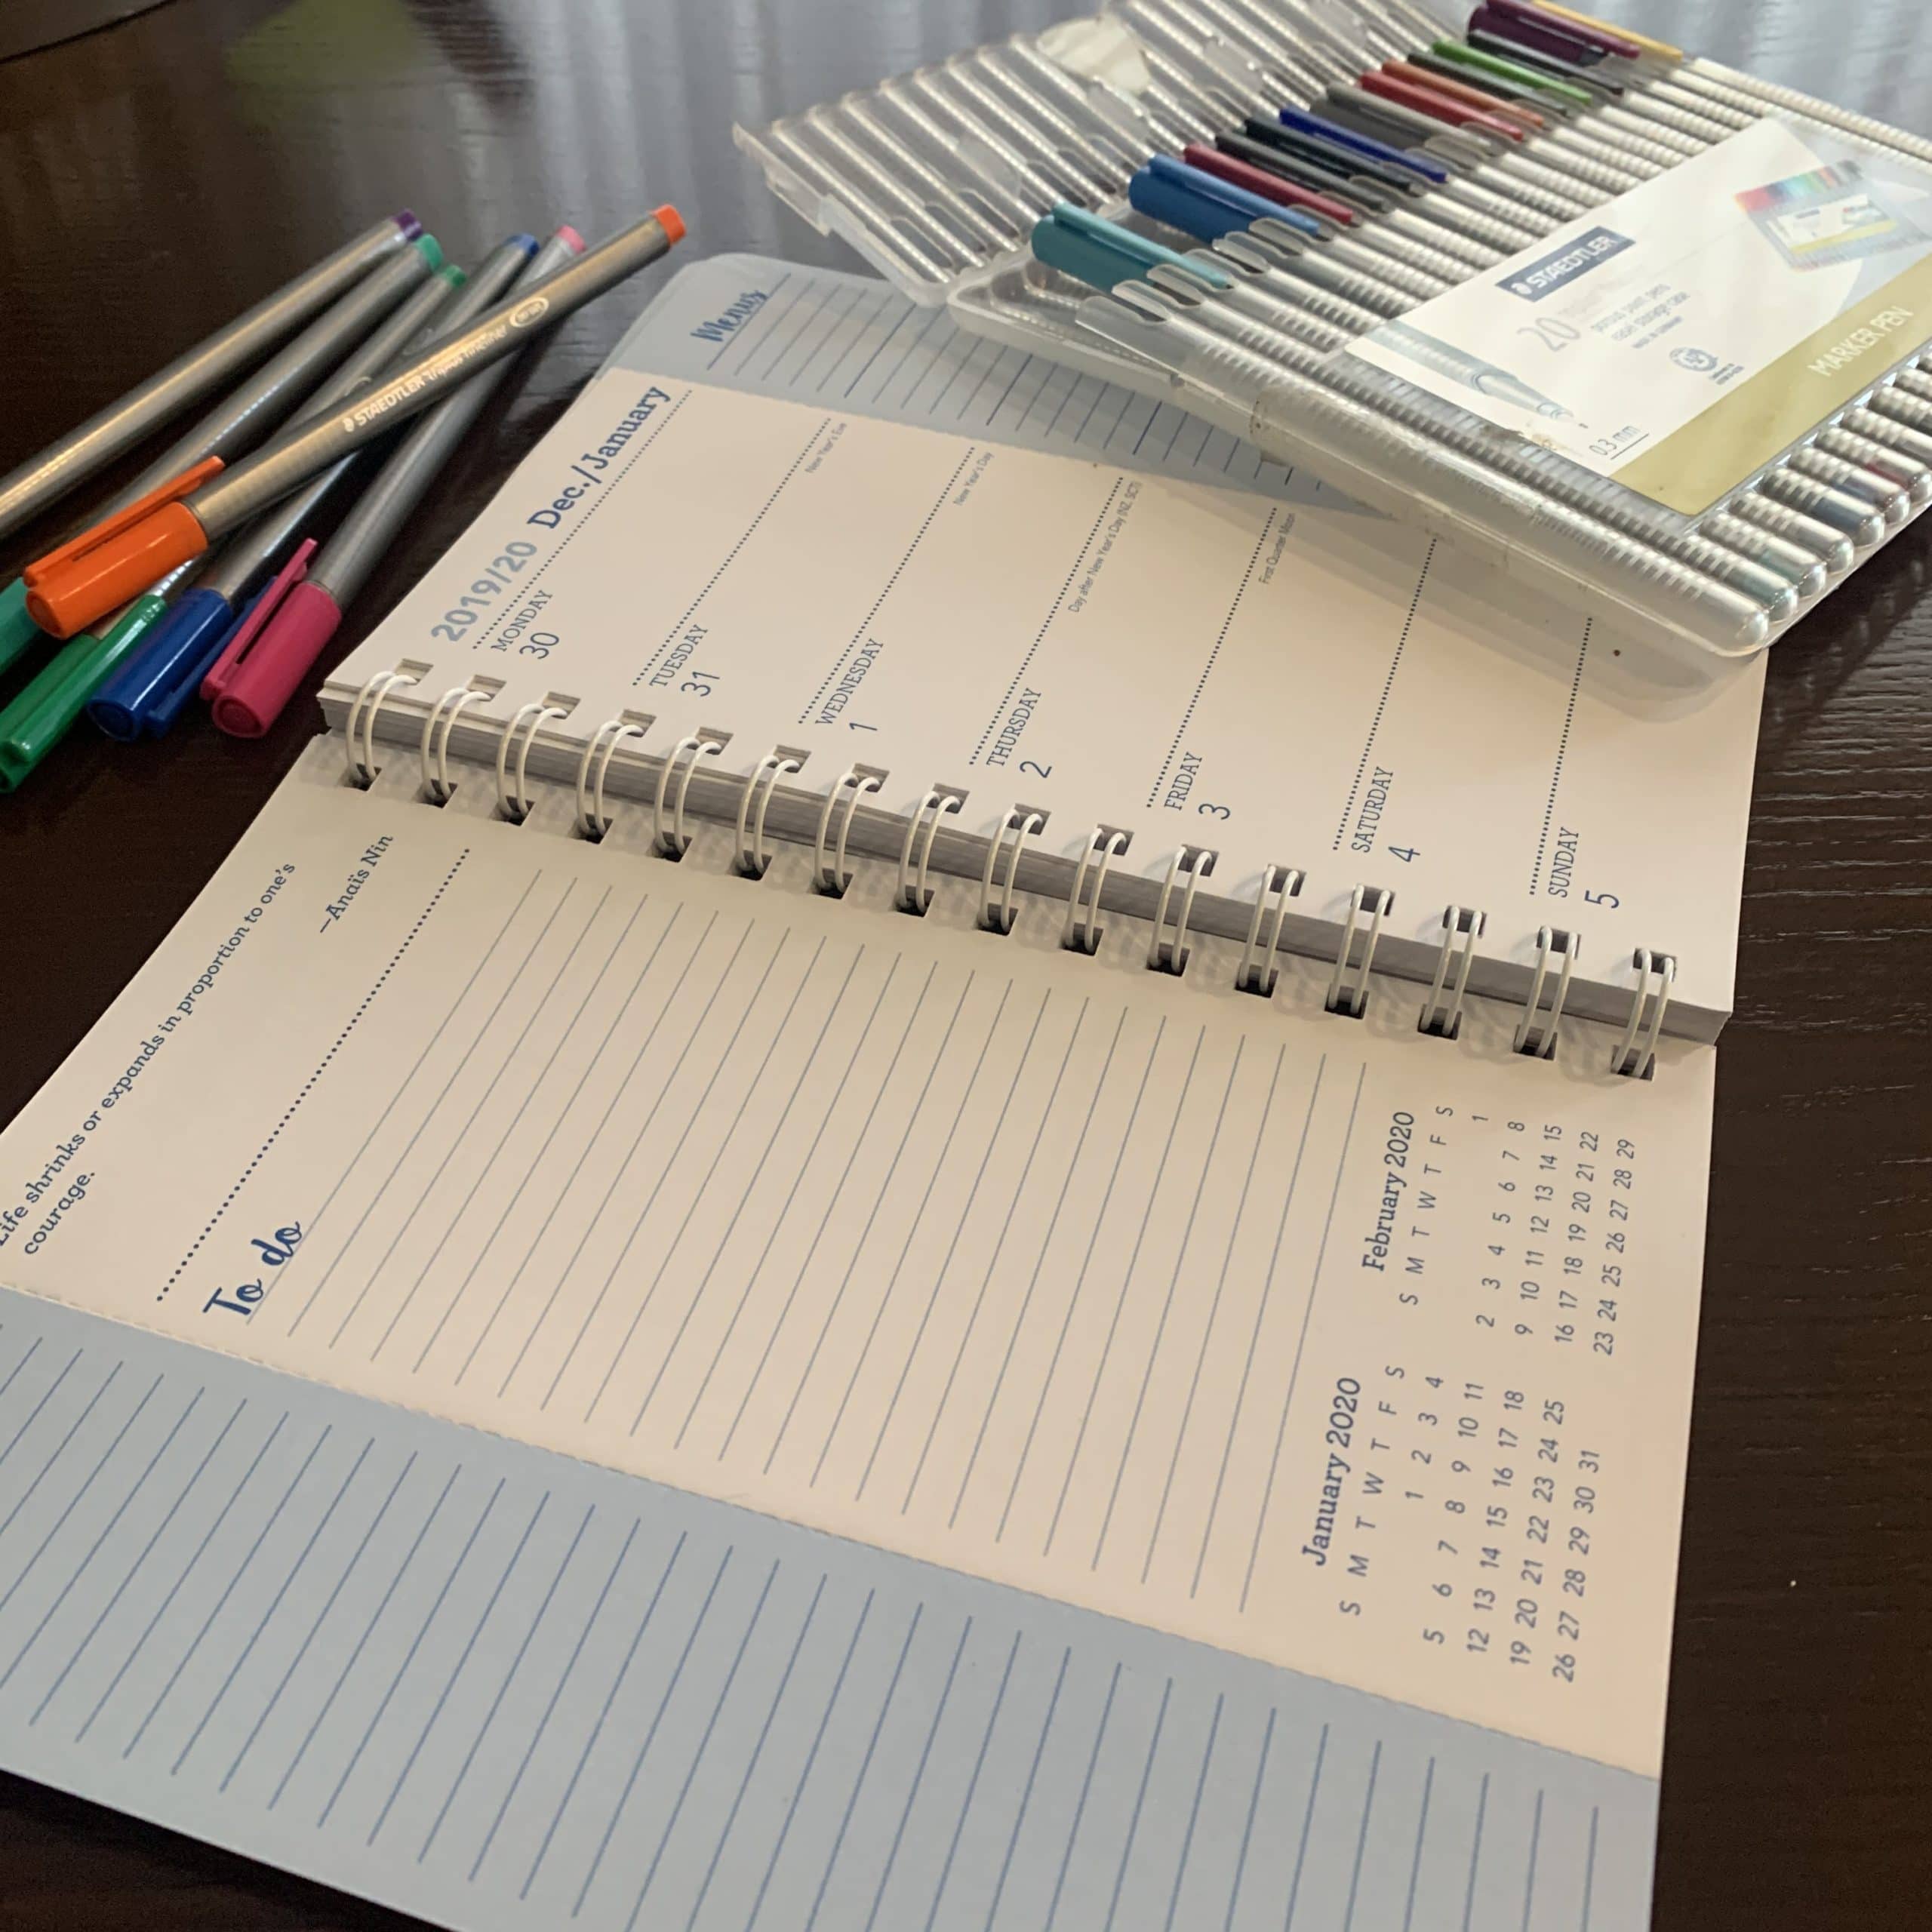 table with empty planner and colorful pens